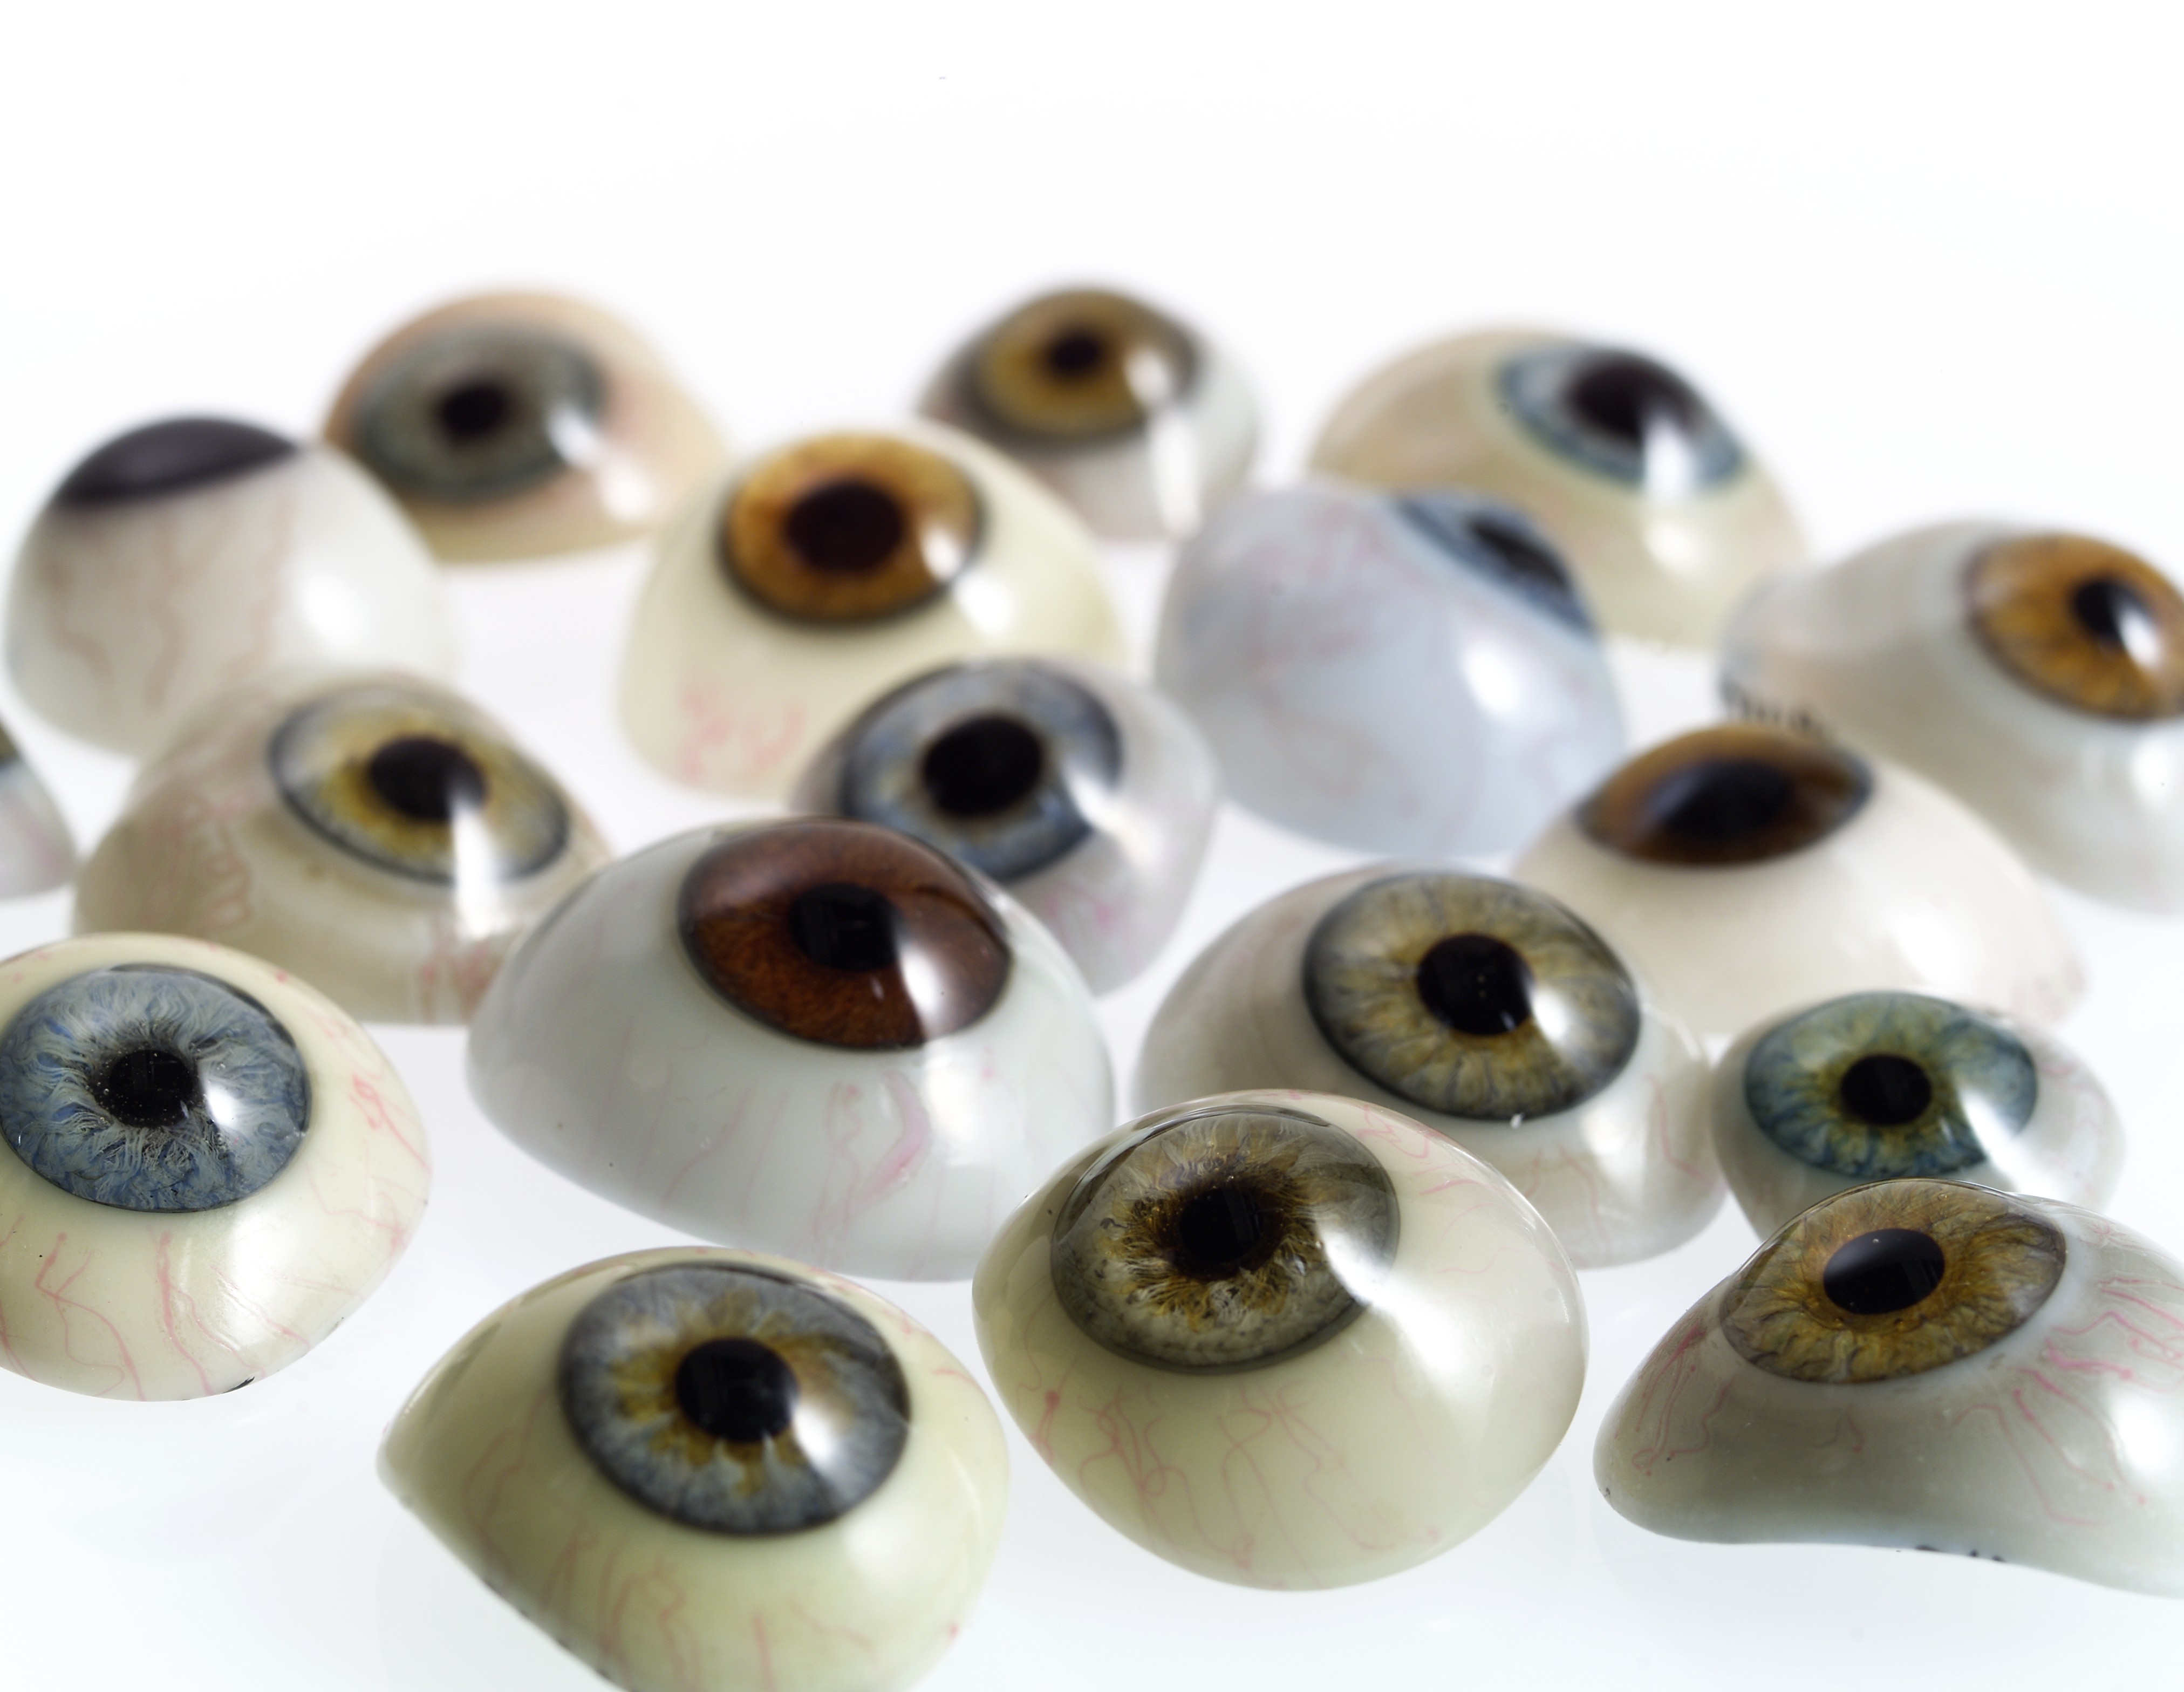 File:A selection of glass eyes from an opticians glas eye case